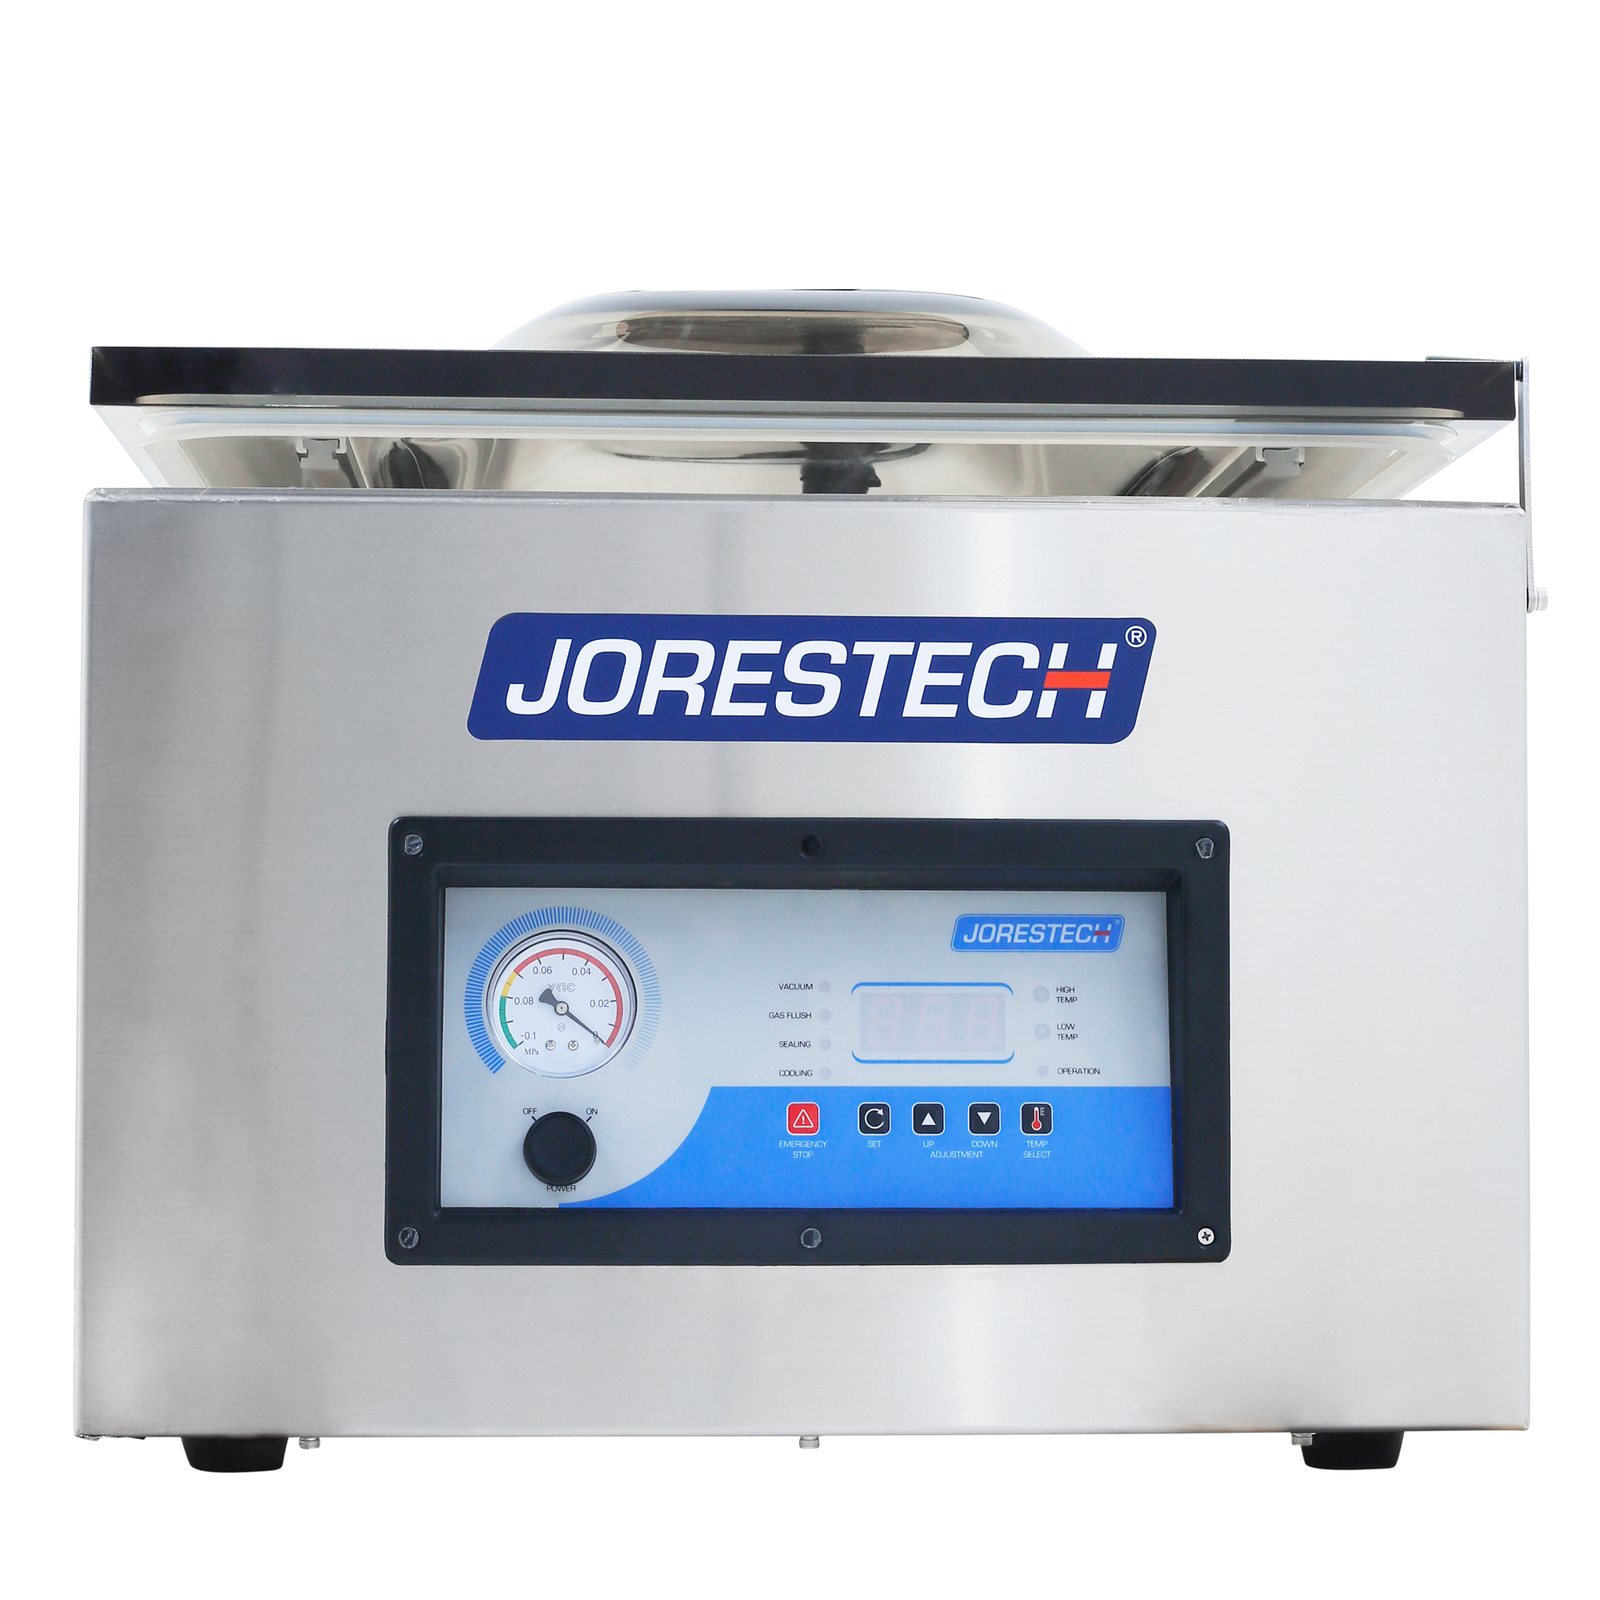 Commercial Vacuum Sealer with Double Chamber and Sealing Bars by JORES Technologies